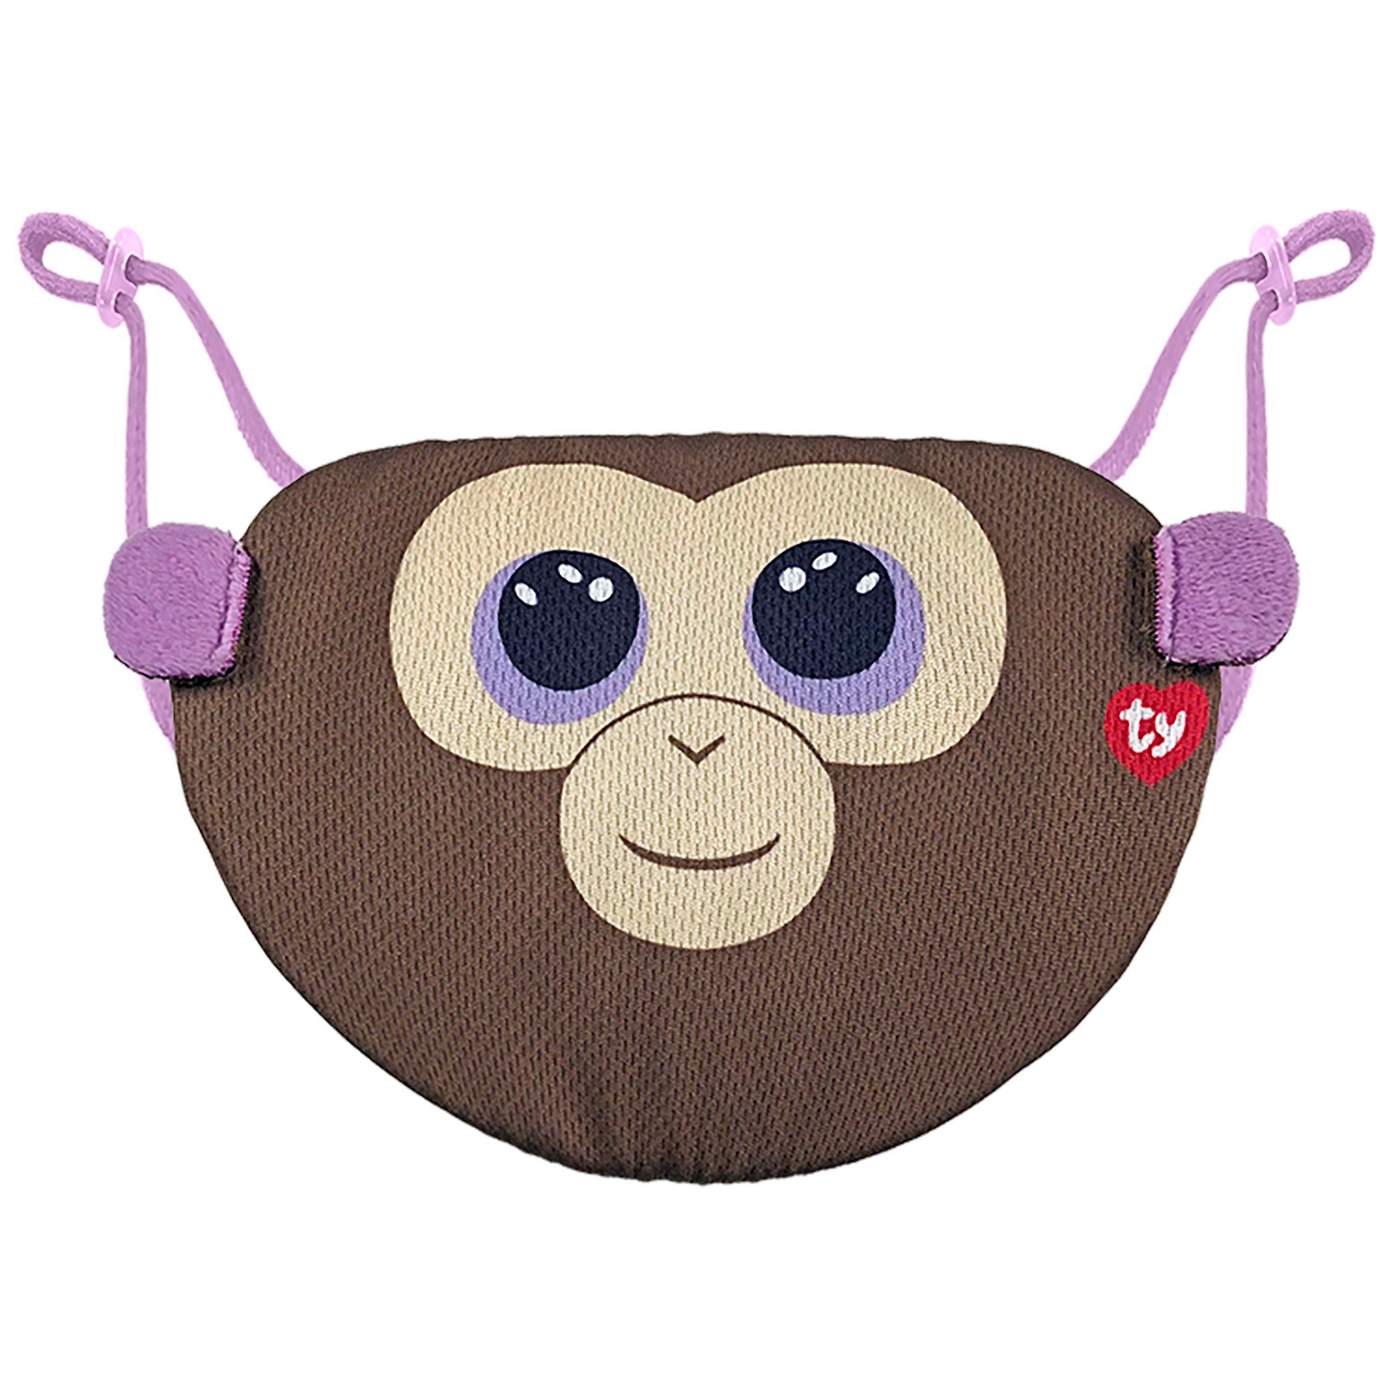 ty Beanie Boo Coconut-Brown Monkey Protective Face Mask; image 1 of 2